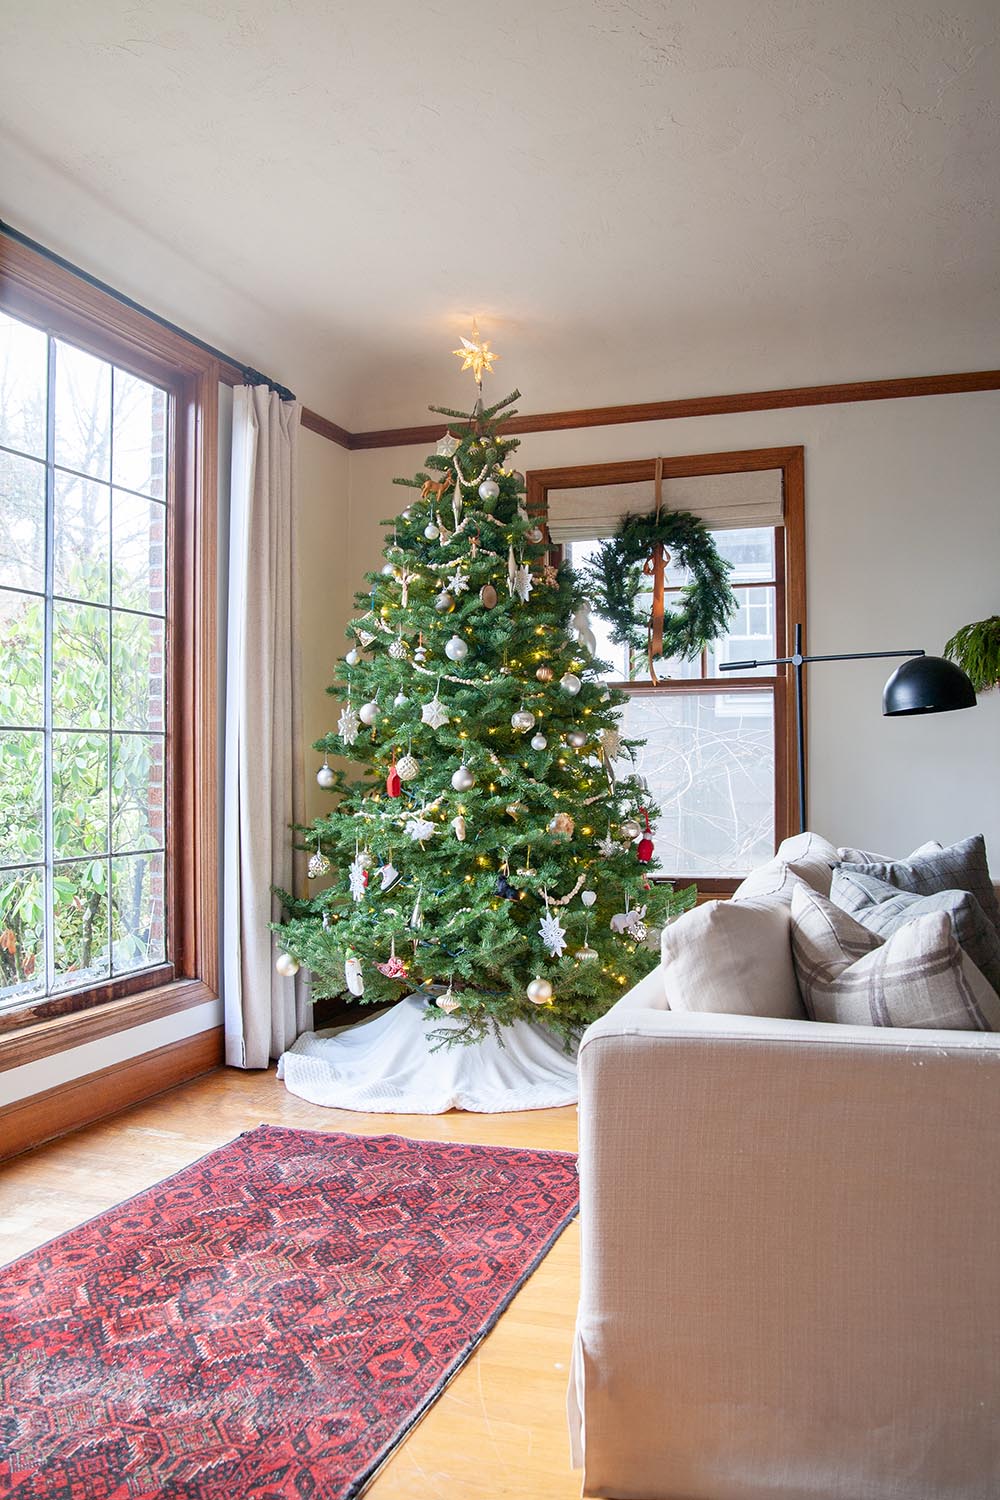 A Christmas tree in living room window 